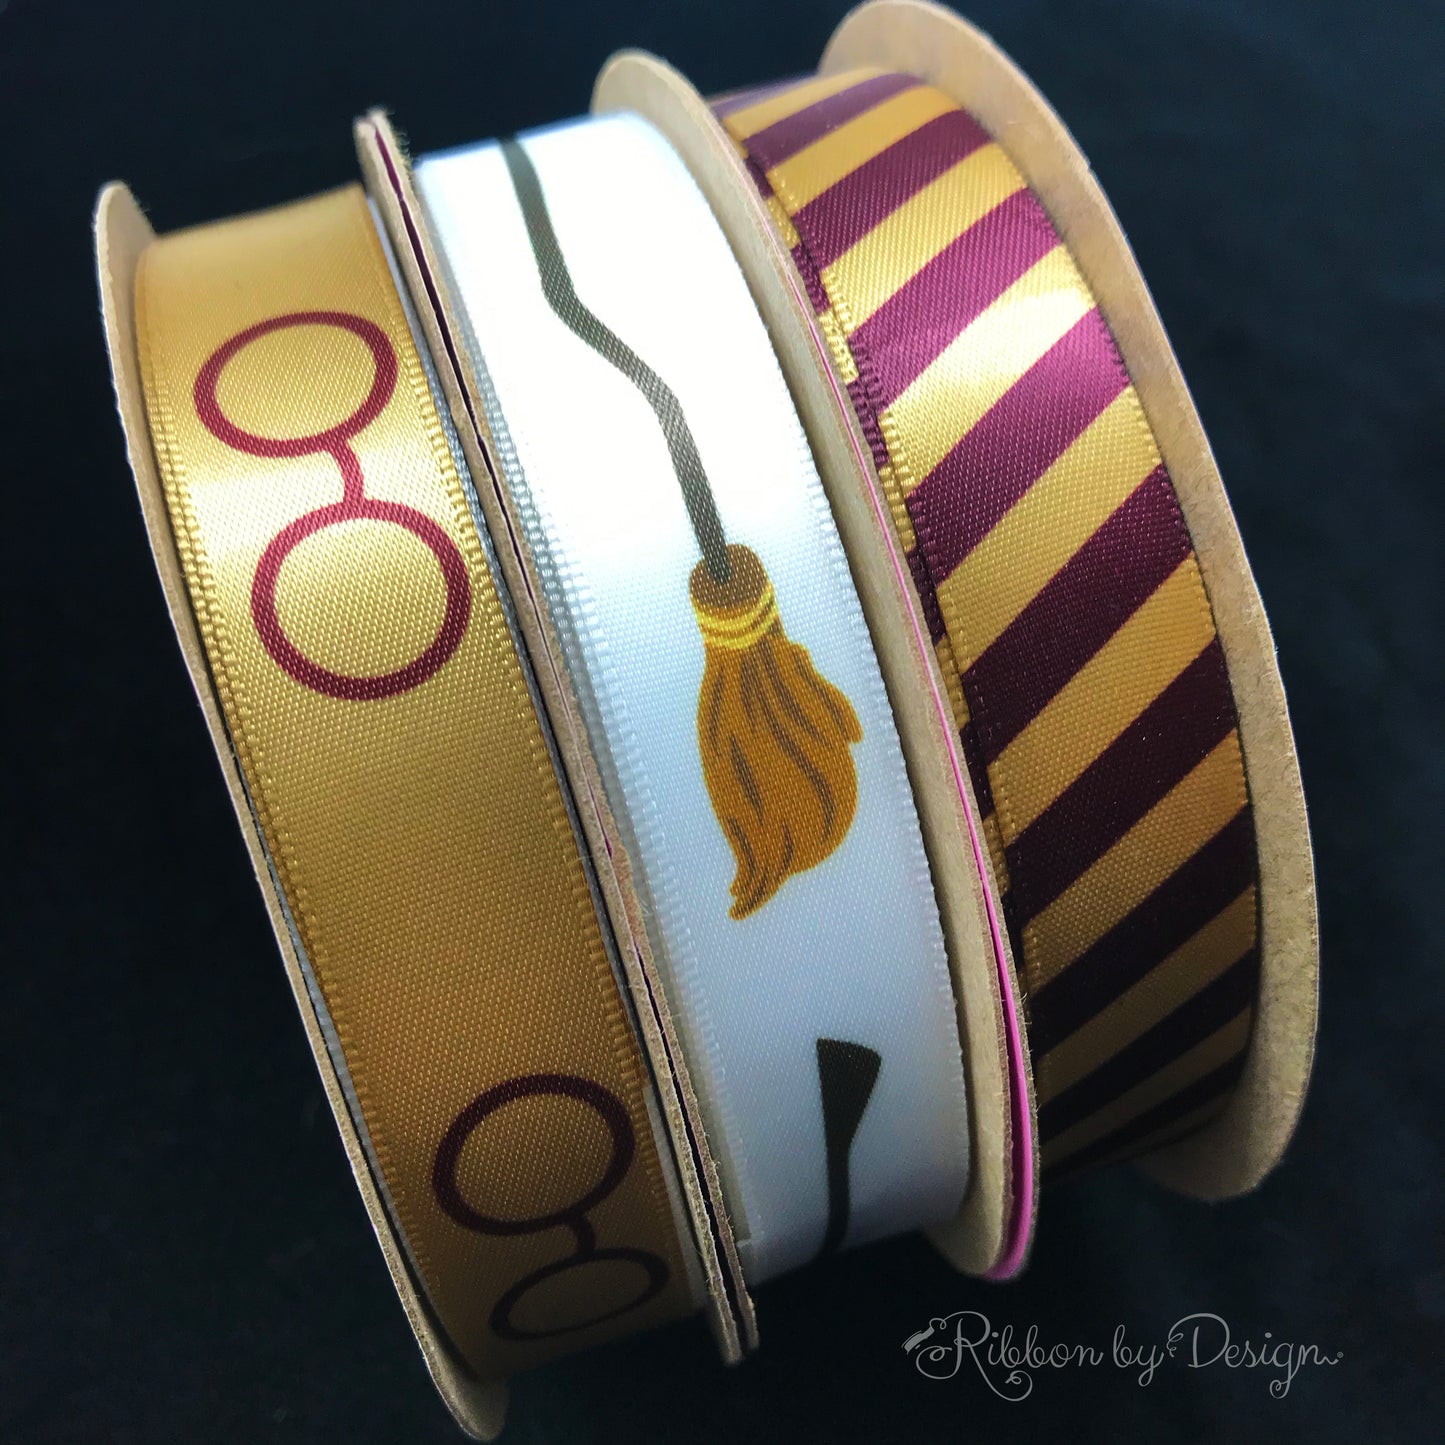 Wizard stripes ribbon in Burgundy and Gold printed on 5/8" Dijon gold satin